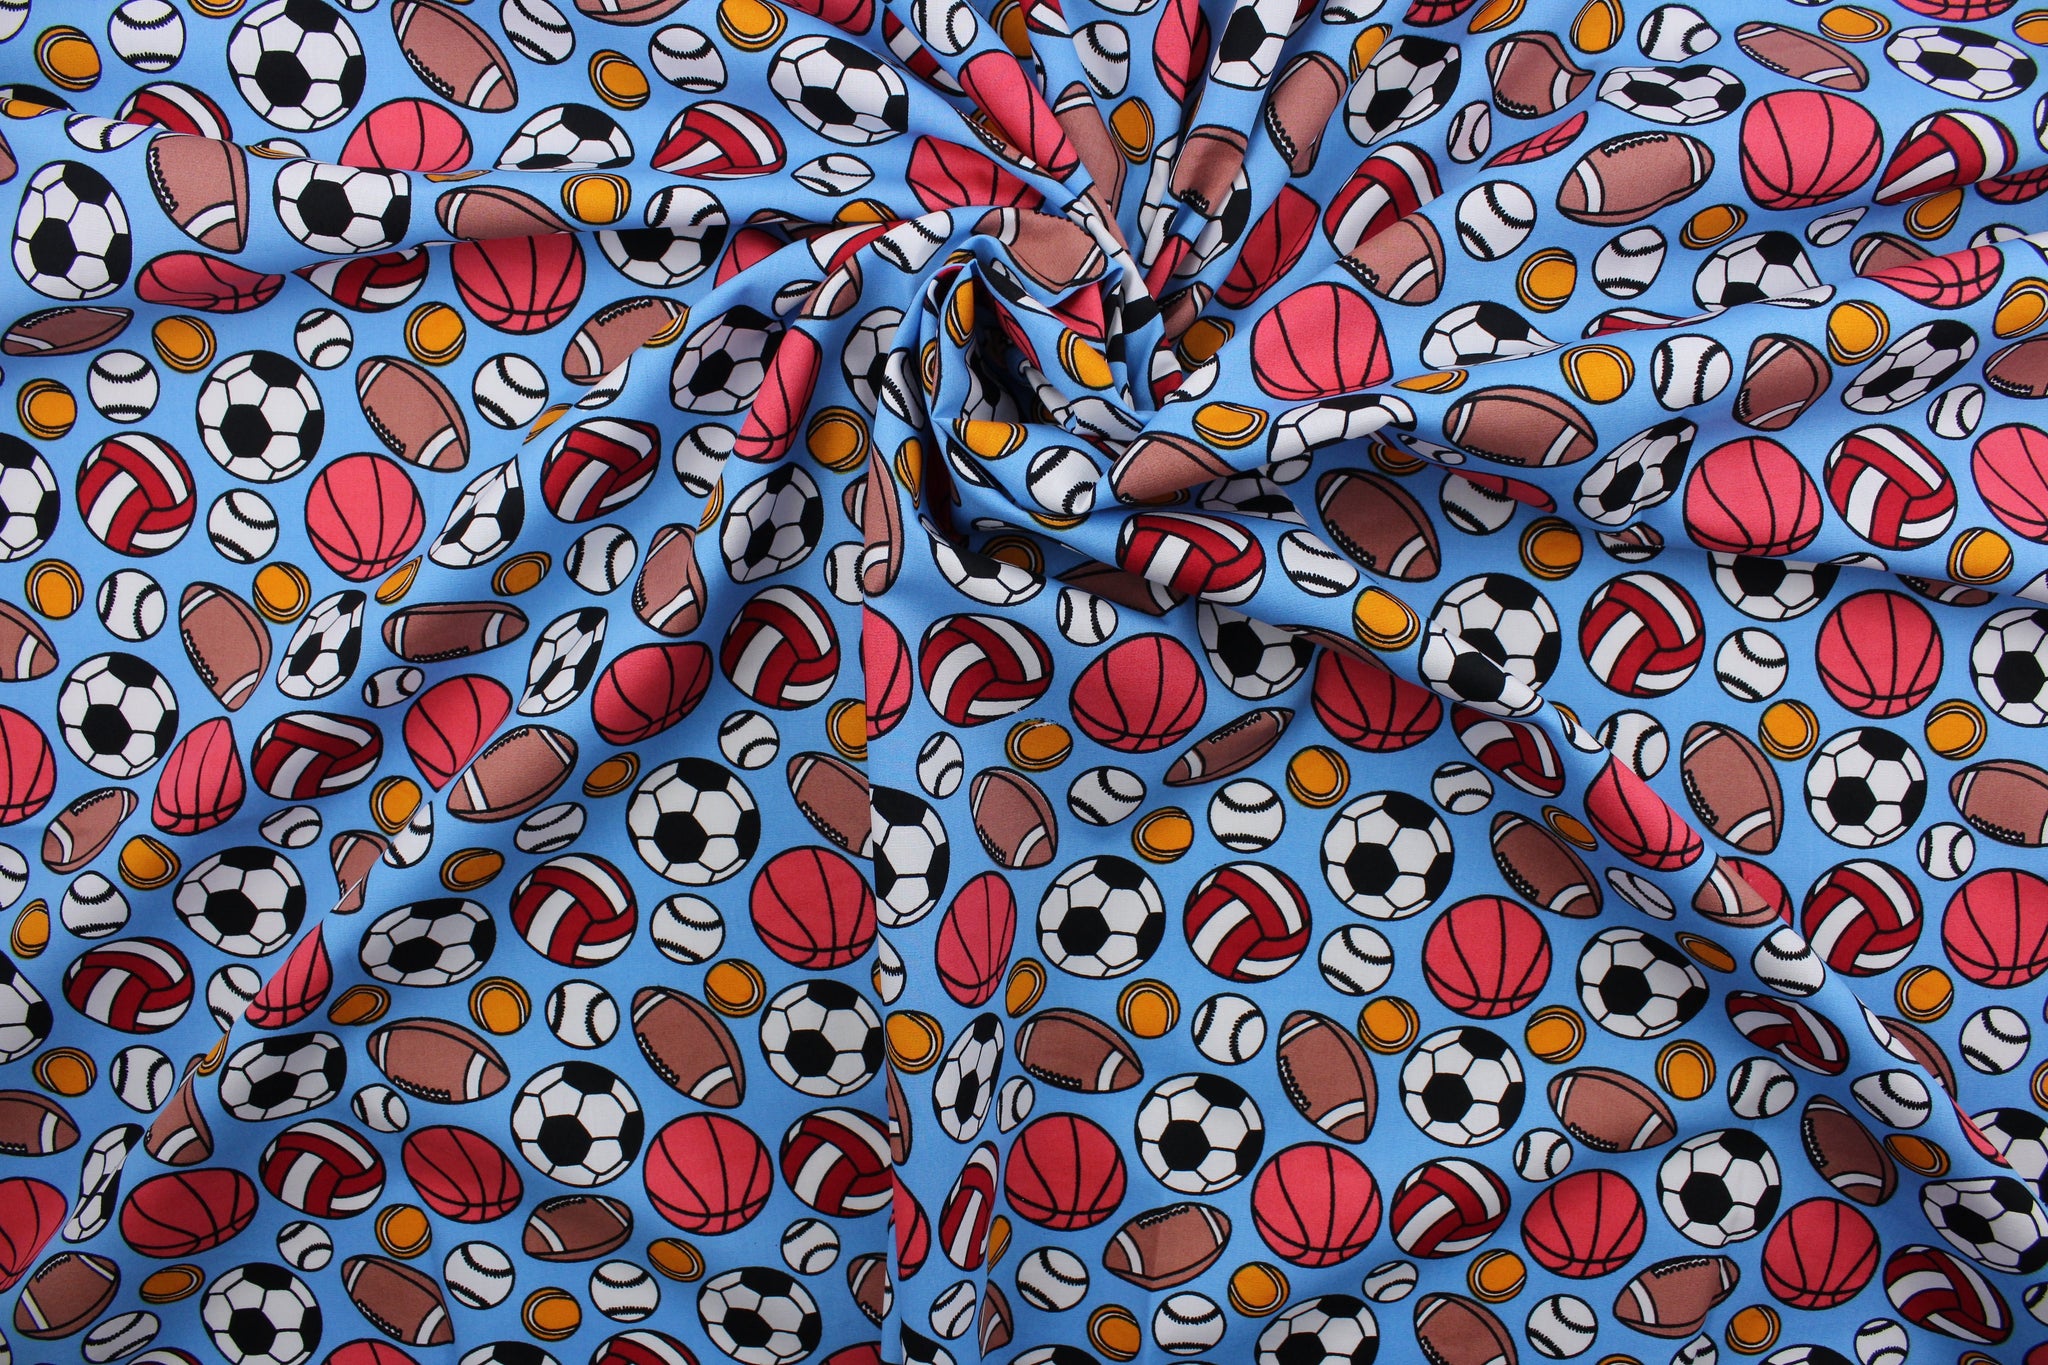 Bouncing Balls in Blue - All About Fabrics